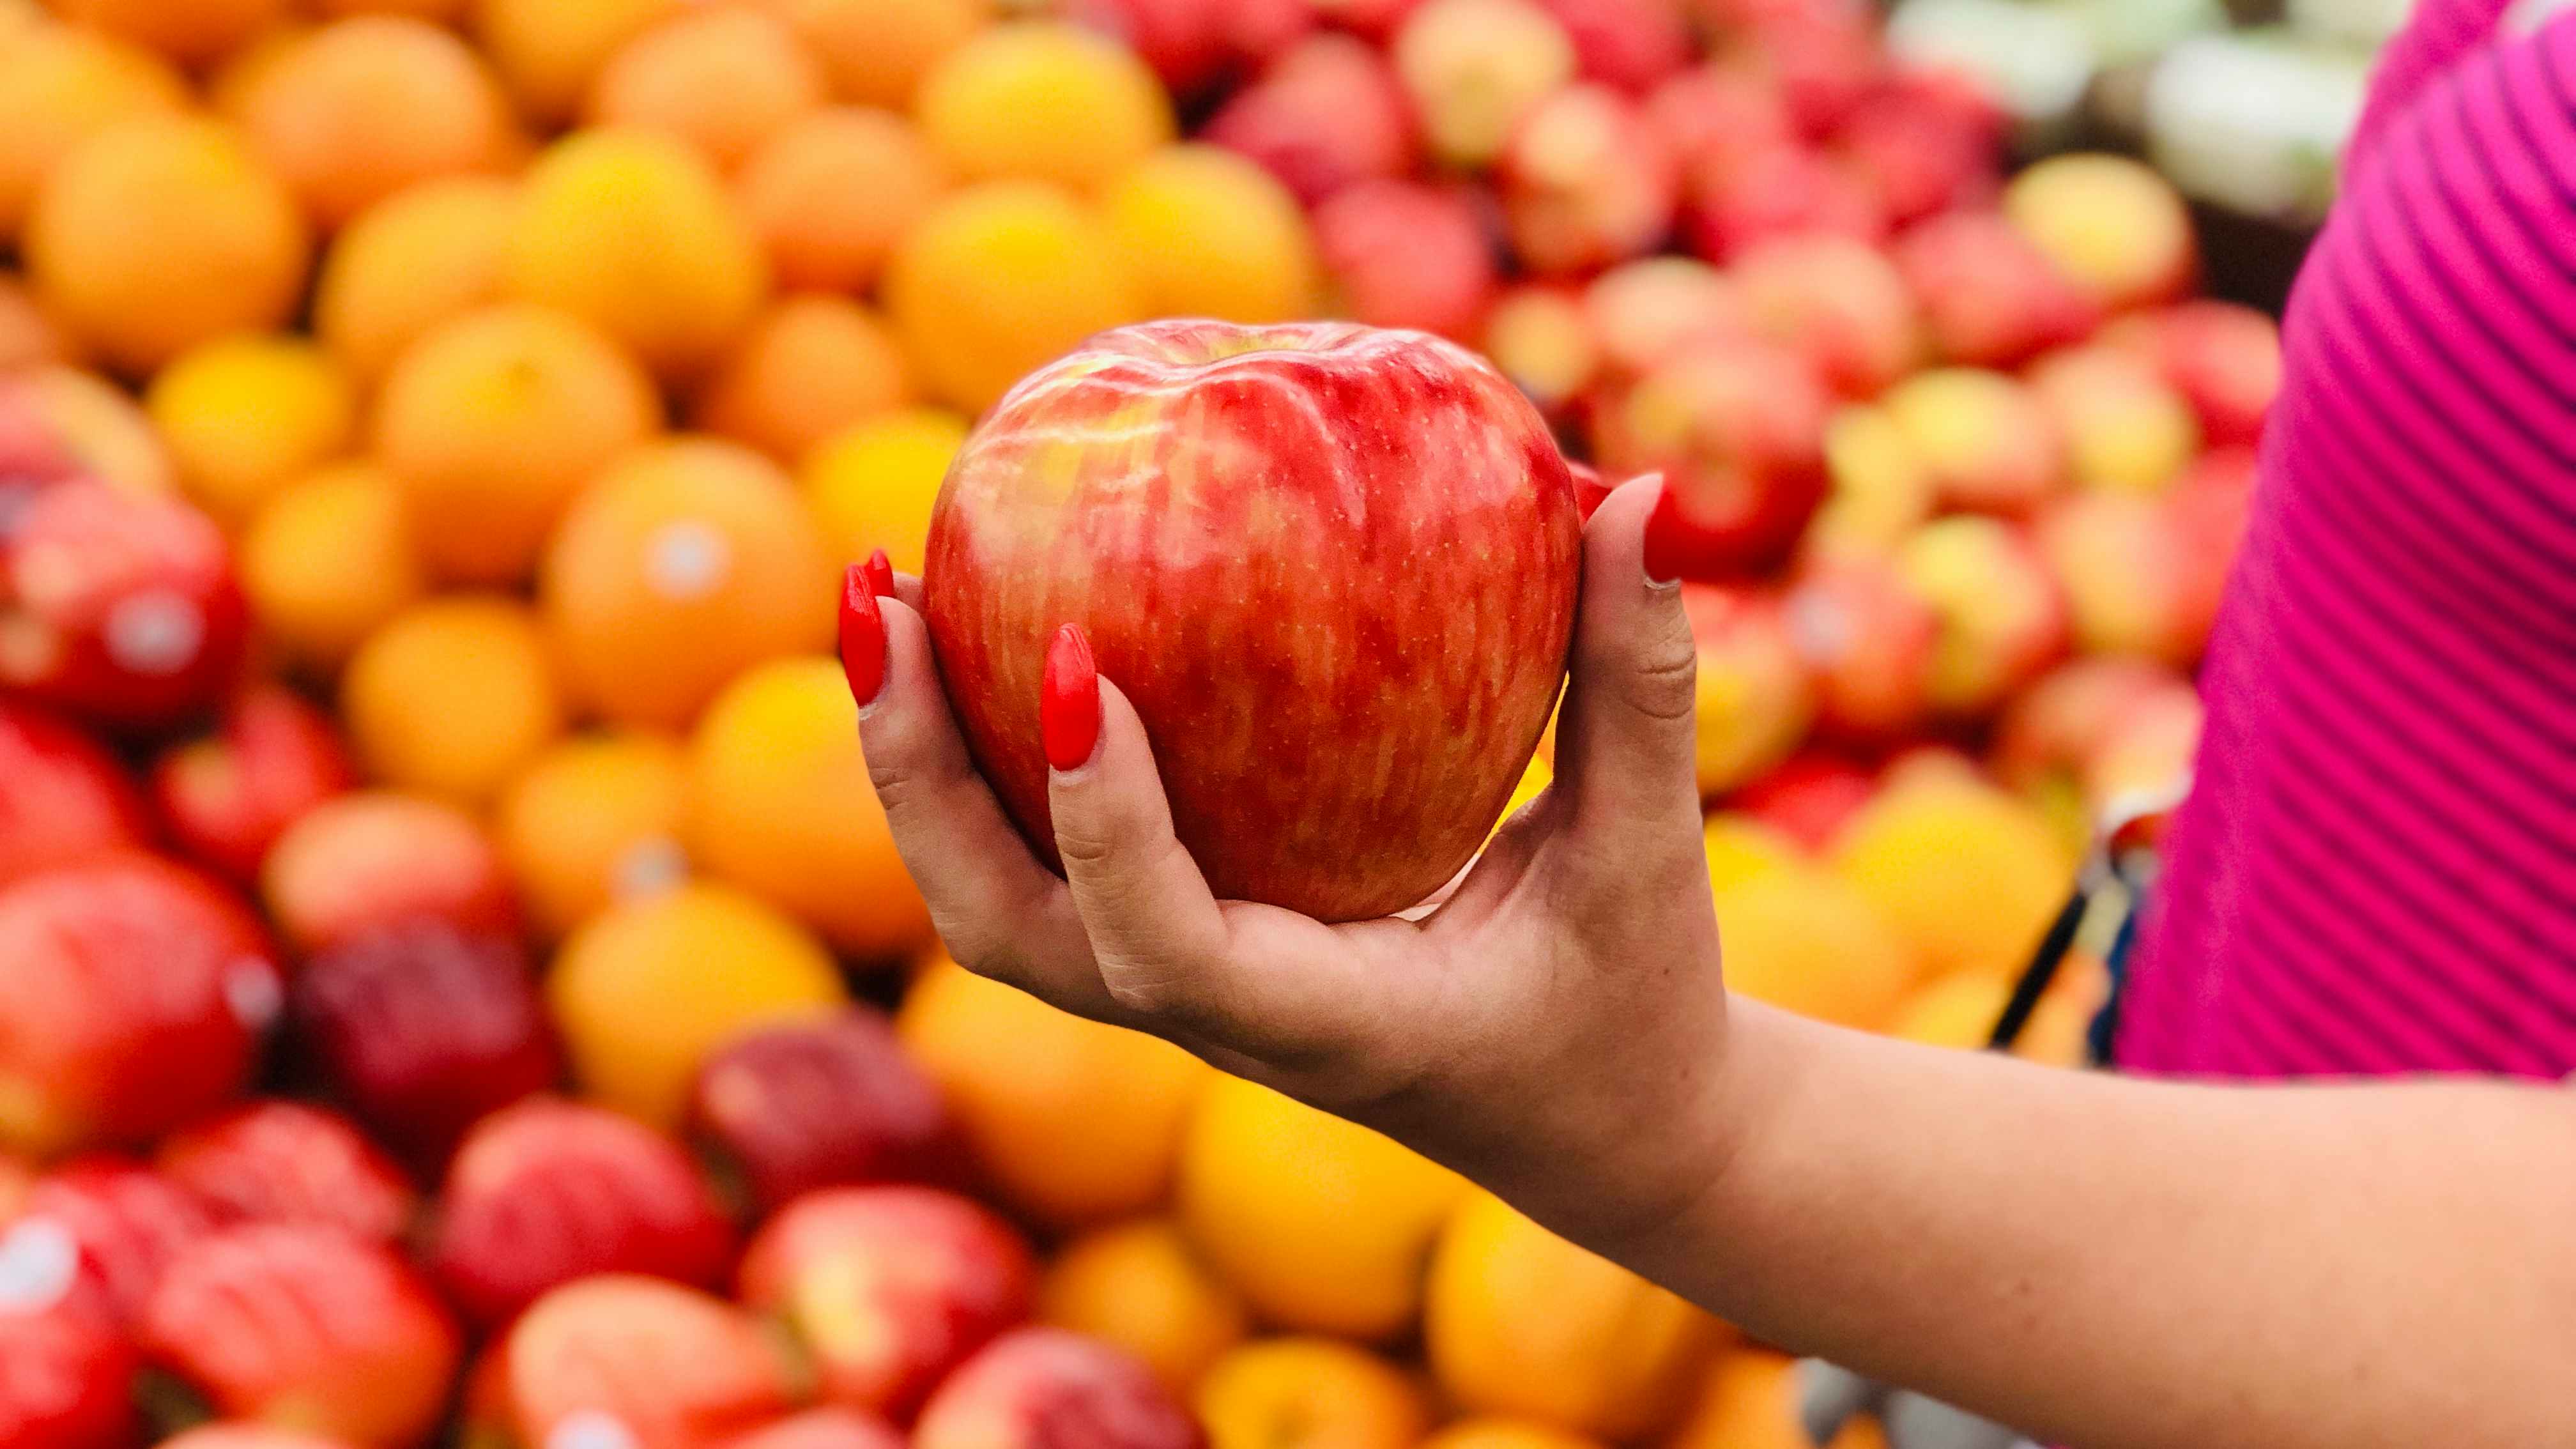 They put the larger apple varieties on sale — so you'll buy the same number of apples but end up spending more.